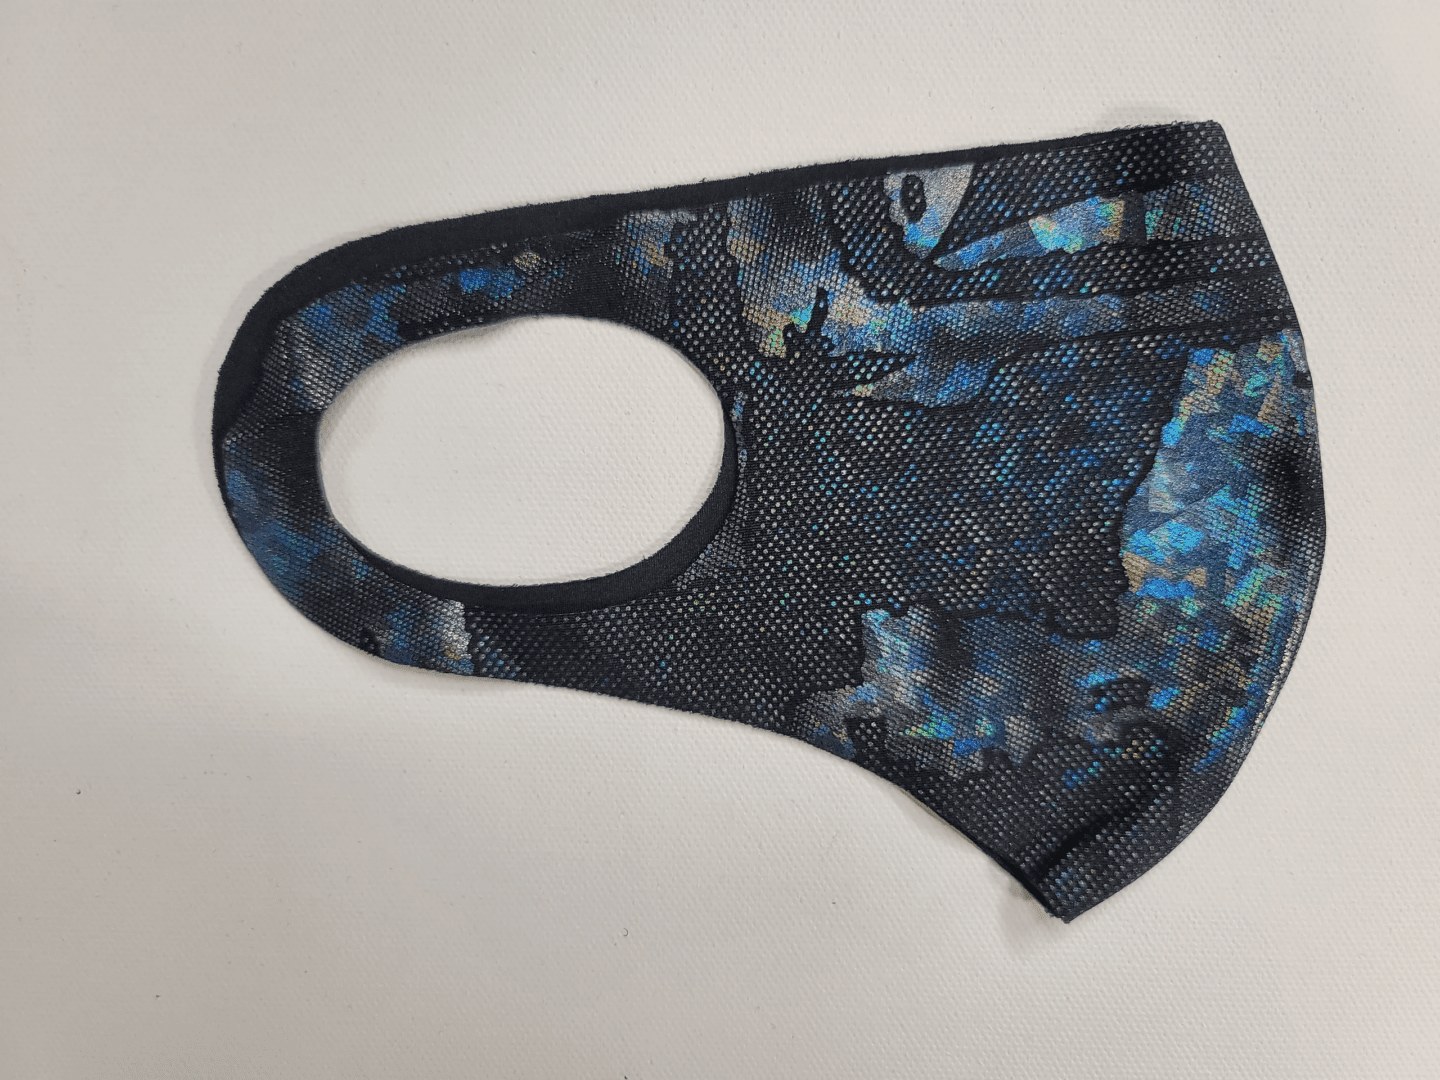 mask with a black and blue camoflauge pattern